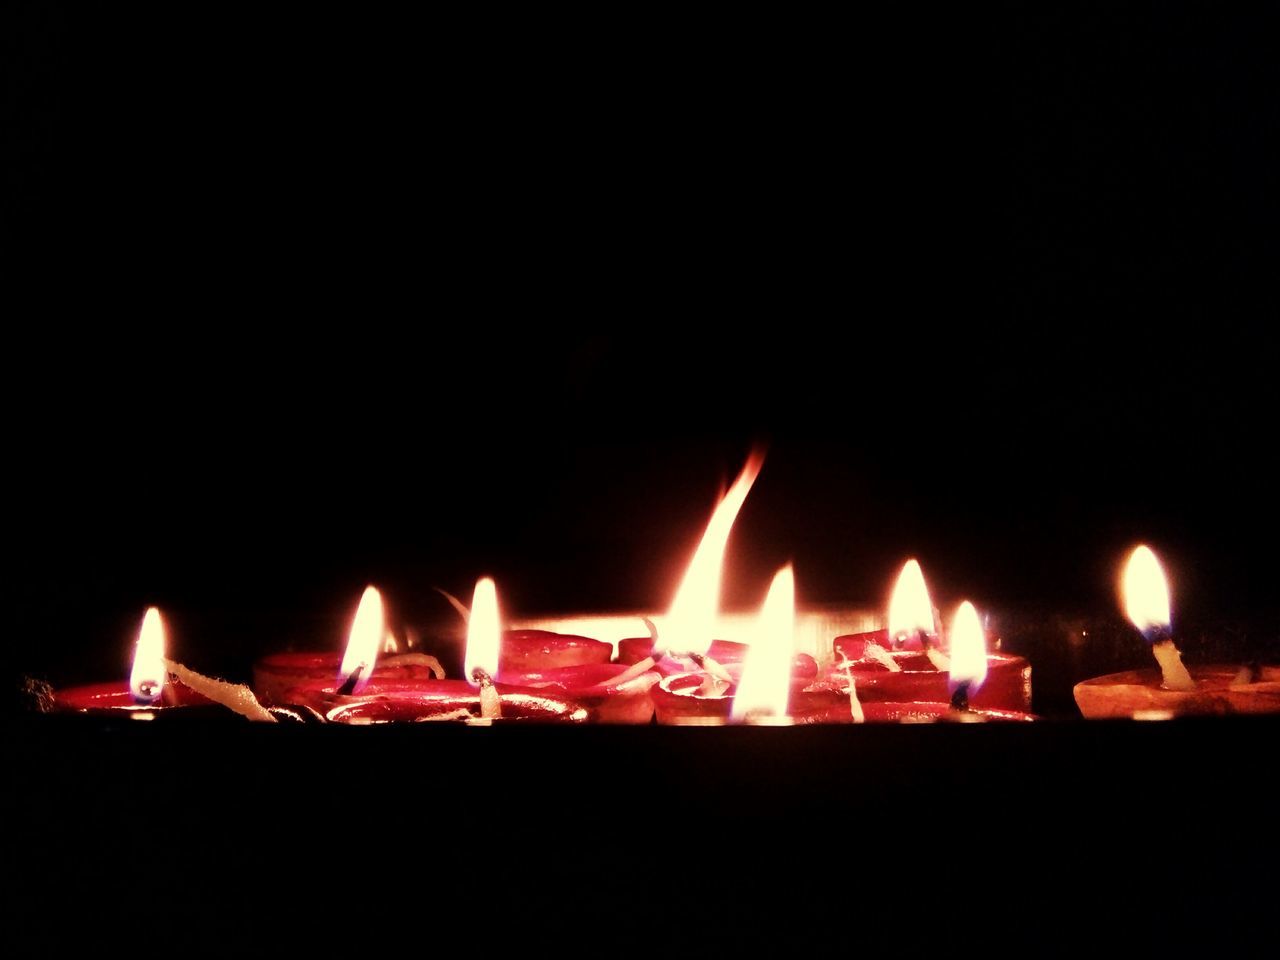 CLOSE-UP OF BURNING CANDLES IN DARKROOM